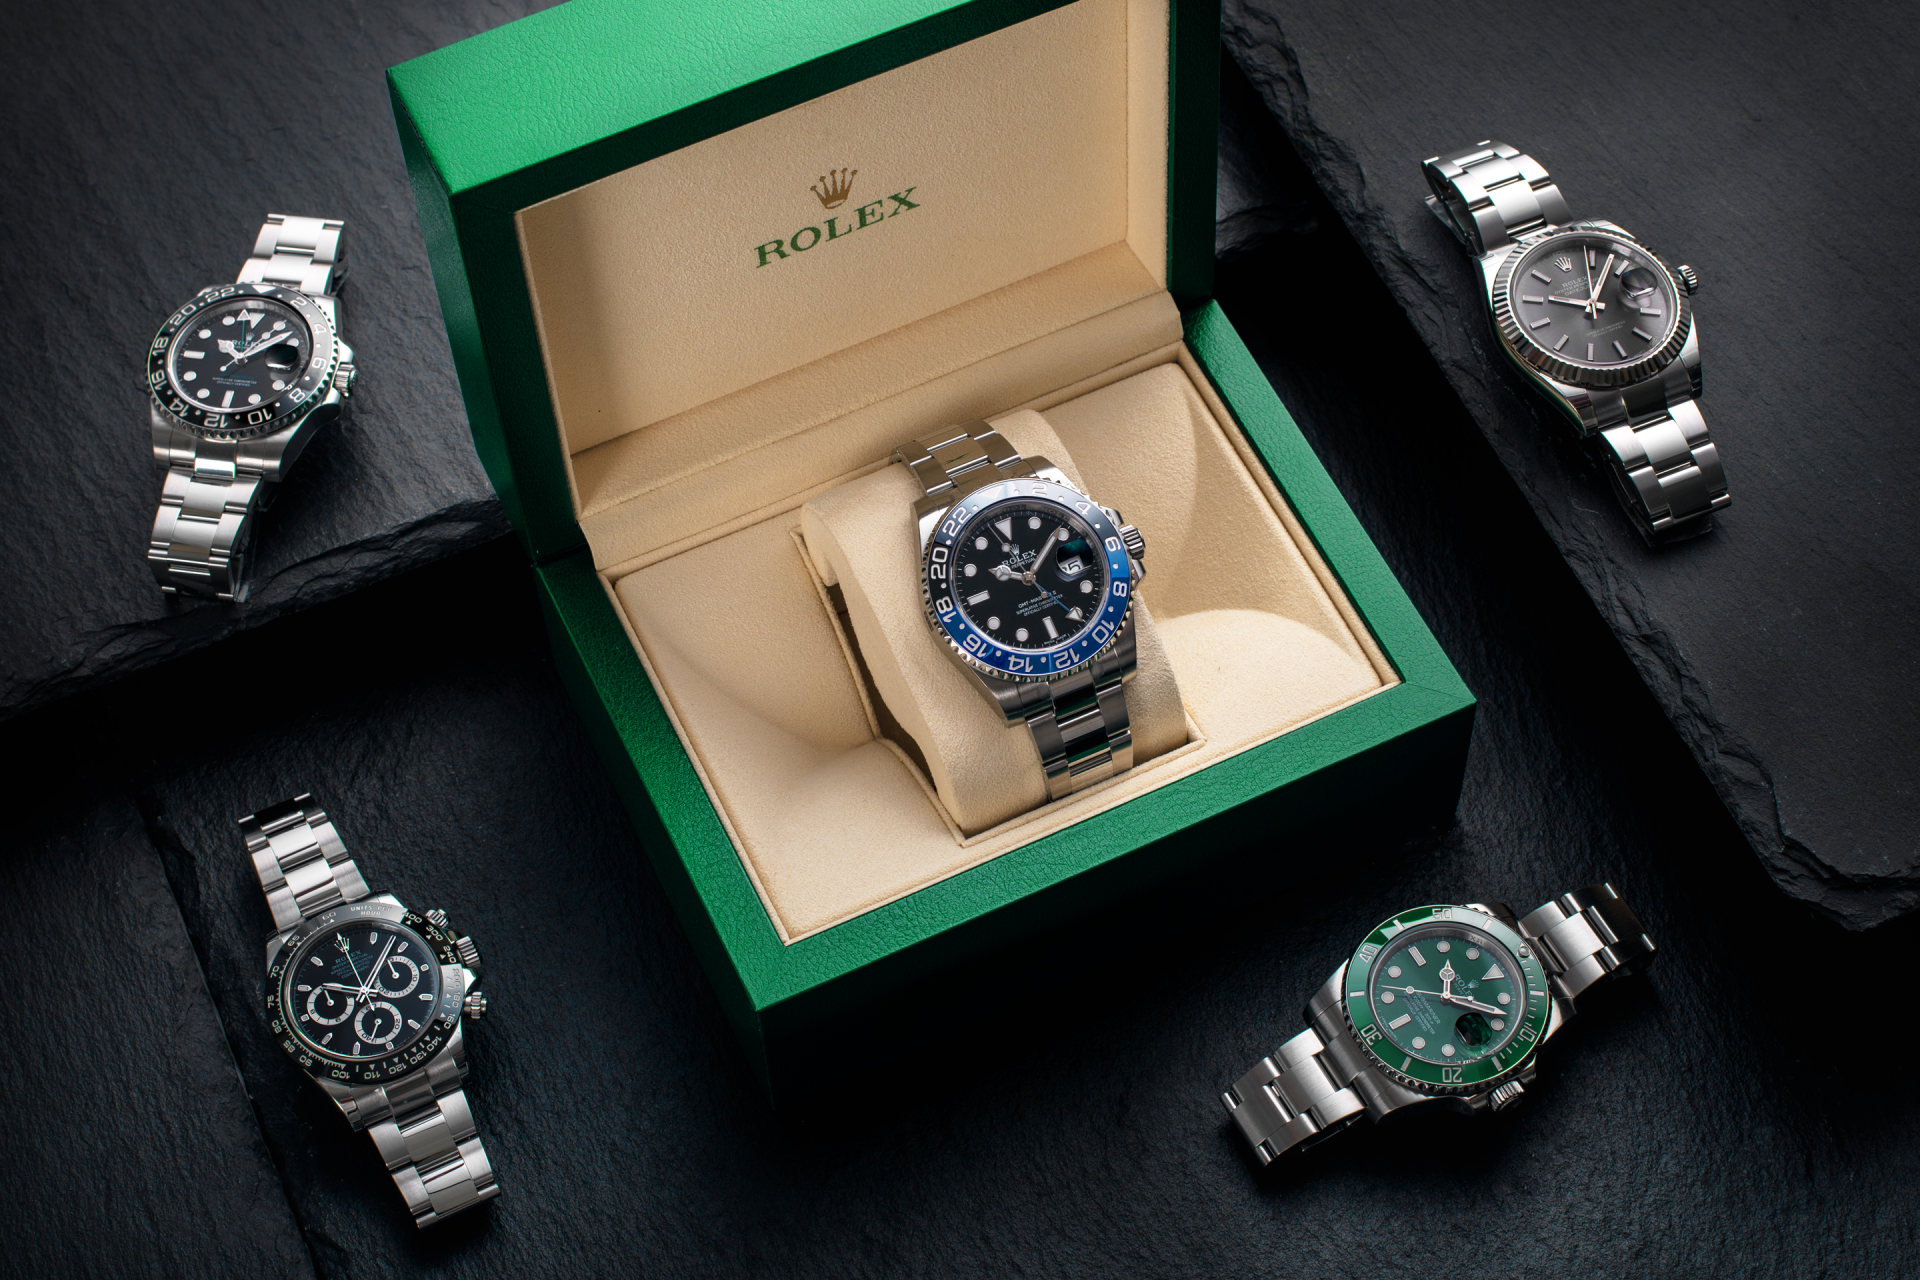 Rolex rumours 2021: What can you expect?